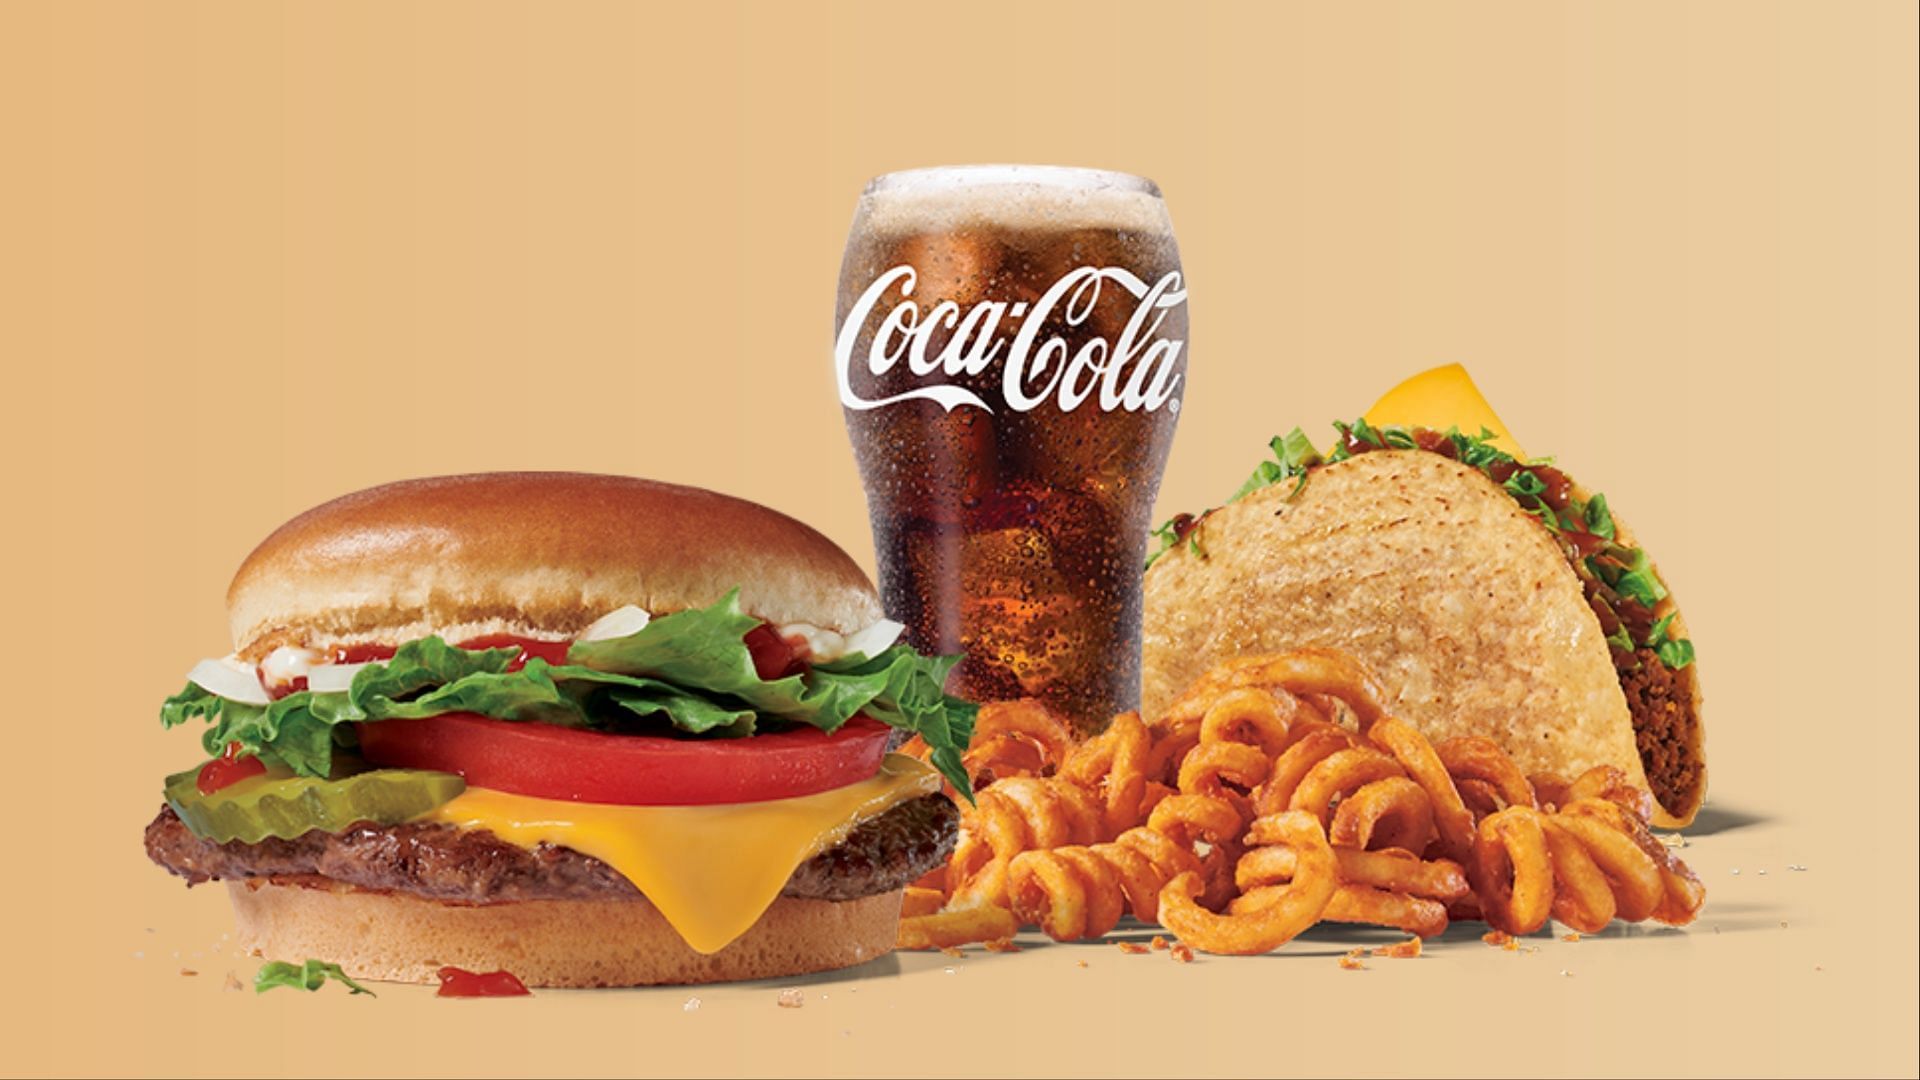 The $5 Jack Pack meal deal comes in two variants with a choice between a Chicken Burger and a Jr. Jumbo Jack Cheeseburger (Image via Jack in the Box)